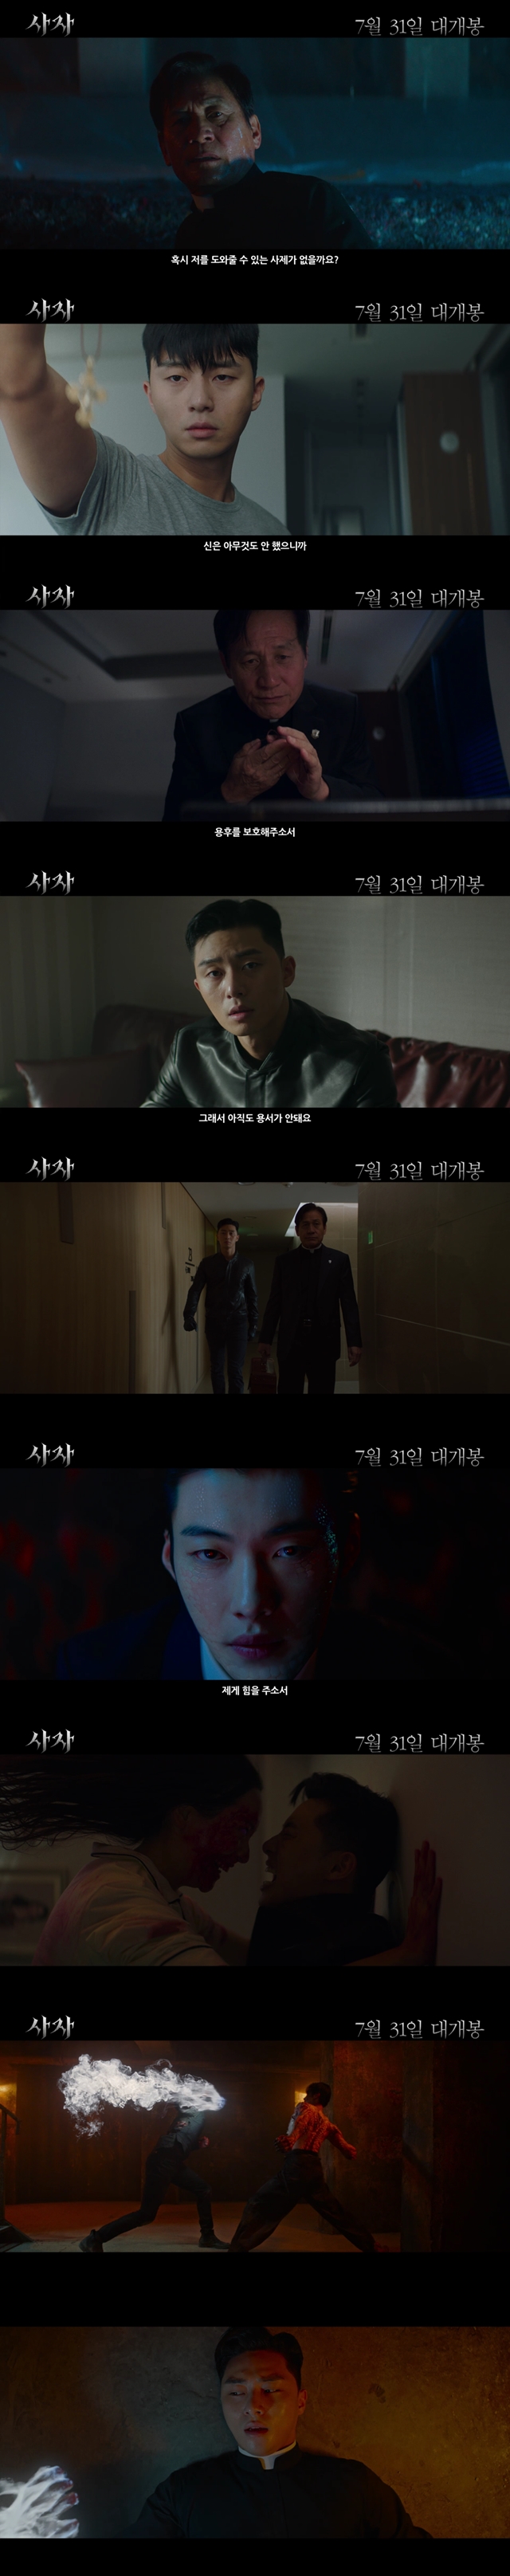 The movie Lion will release the third poster and the third trailer to focus on Attention.Lion is a film about the story of martial arts champion Yonghu (Park Seo-joon) meeting the Kuma priest Ansinbu (Ahn Sung-ki) and confronting the powerful evil () that has confused the world.Park Seo-joon, a martial arts champion who faces evil, raises questions about the exciting development and powerful action in the movie with his face and charismatic eyes that have left behind the wound.Ahn Sung-ki, who is divided into a priest s safe lady who pursues evil with all his strong beliefs and good will, overwhelms his gaze with a heavy presence that feels his age.Woo Do-hwan, who plays the black Bishop Jisin, who spreads evil to the world, creates a mysterious atmosphere with an unknown expression and sharp eyes.Here, the copy of Will you stand on the side of evil or against evil raises the curiosity about the huge clash of good and evil in the real world in the movie.The trailer, released with the third Poster, begins with the childhood of the martial arts champion Yonghu, which catches the eye.After losing his father in an accident of injustice, the encounter between the martial arts champion Yonghu, who has only distrust of the world and hatred for God, and the priest s safe wife, who has been confronted with evil hidden all over the world, stimulates interest with a new setting that has never been before.The appearance of Yonghu, who suffers from the scars of questions that have occurred in his hands and can not easily erase his resentment toward the world, encounters and changes the Ansinbu, predicts a hot drama that Yonghu and Ansinbu will show.The black Bishop Jishin, which takes his own consciousness toward the existence of evil in a secret space, focuses on Attention with a mysterious presence and overwhelming visuals.The copy of Gods Lion against evil and the appearance of Yonghu against powerful boomers give an intense impact with explosive action and special activity.Especially, the explosive confrontation between Yonghu and Jishin, which became the Lion of God, raises the expectation of the movie to the highest level, and the flame rising like a flame in the hands of Yonghu raises curiosity by foreshadowing the original action of Lion with fantasy imagination.bak-beauty